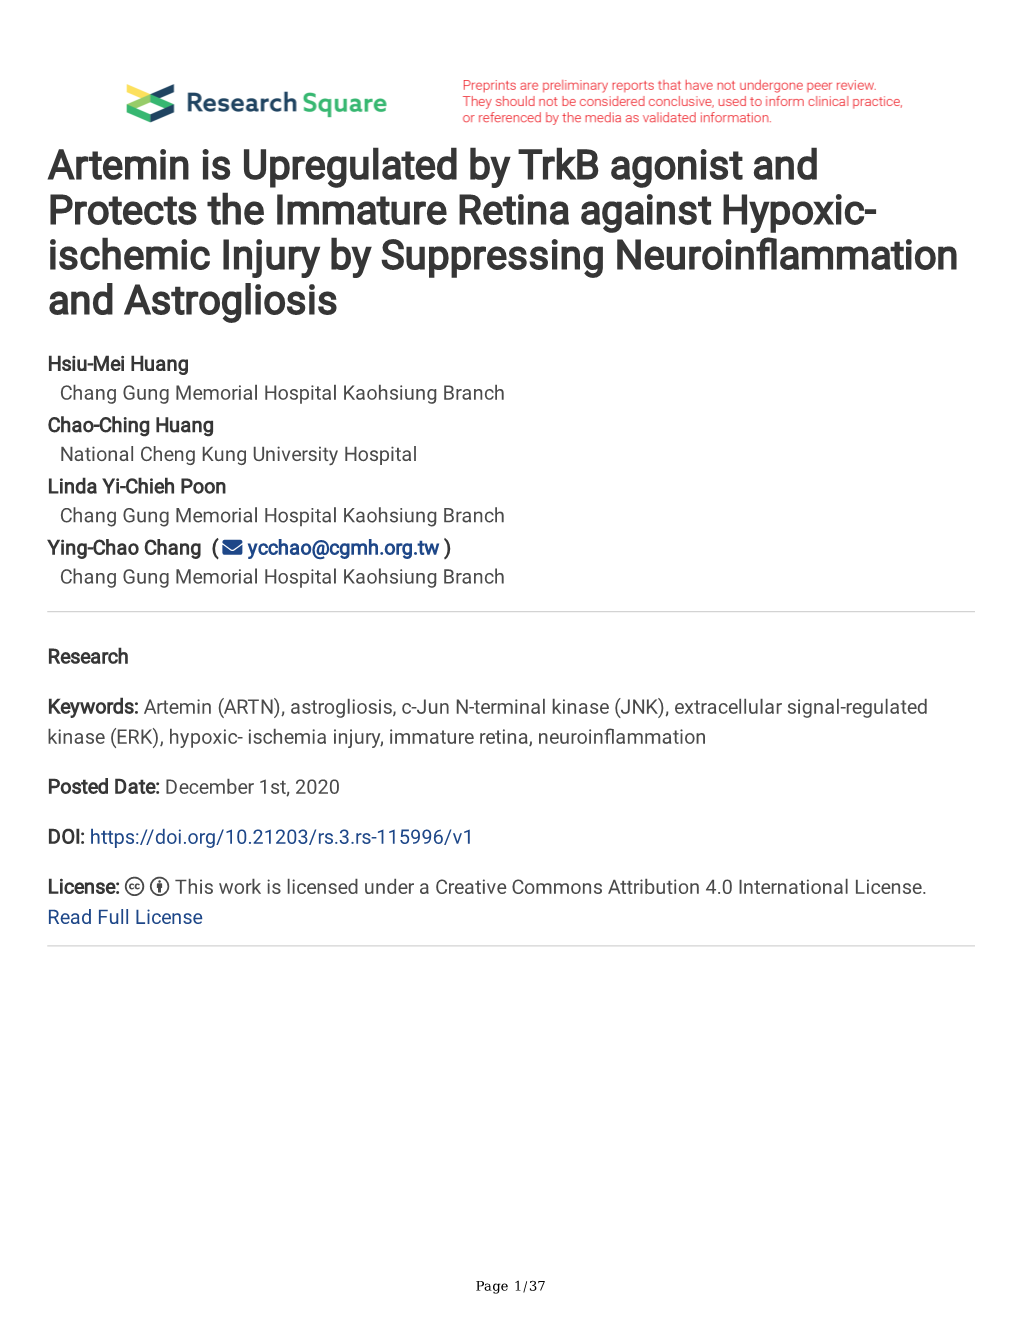 Artemin Is Upregulated by Trkb Agonist and Protects the Immature Retina Against Hypoxic- Ischemic Injury by Suppressing Neuroinfammation and Astrogliosis